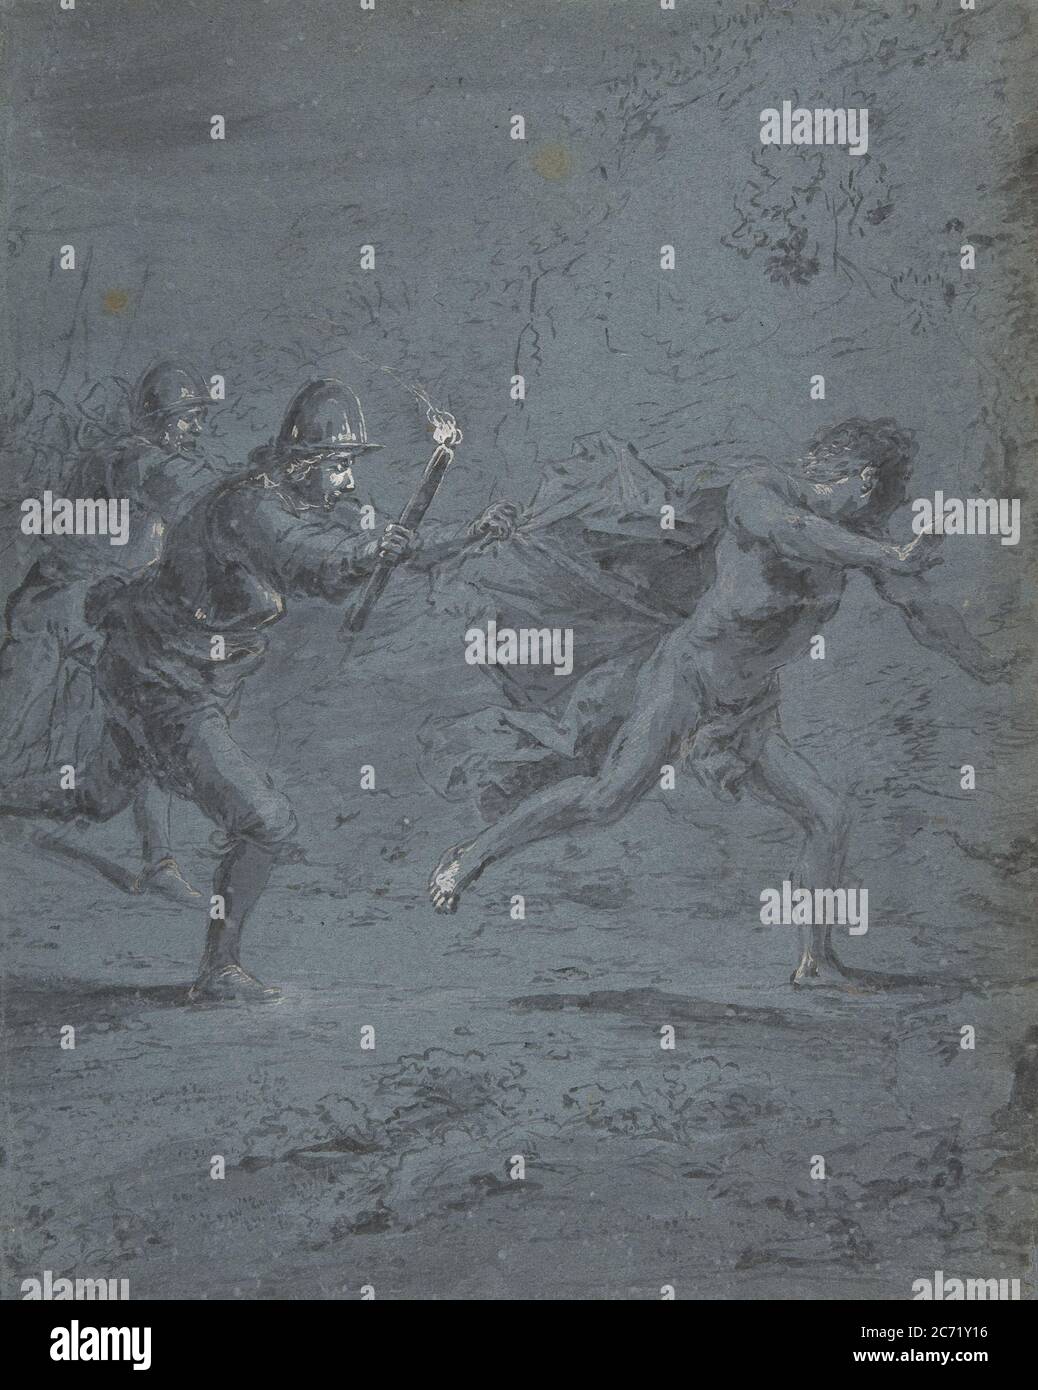 Night scene with soldiers chasing a fugitive (Mark XIV, 5-52), 1611-74. Stock Photo